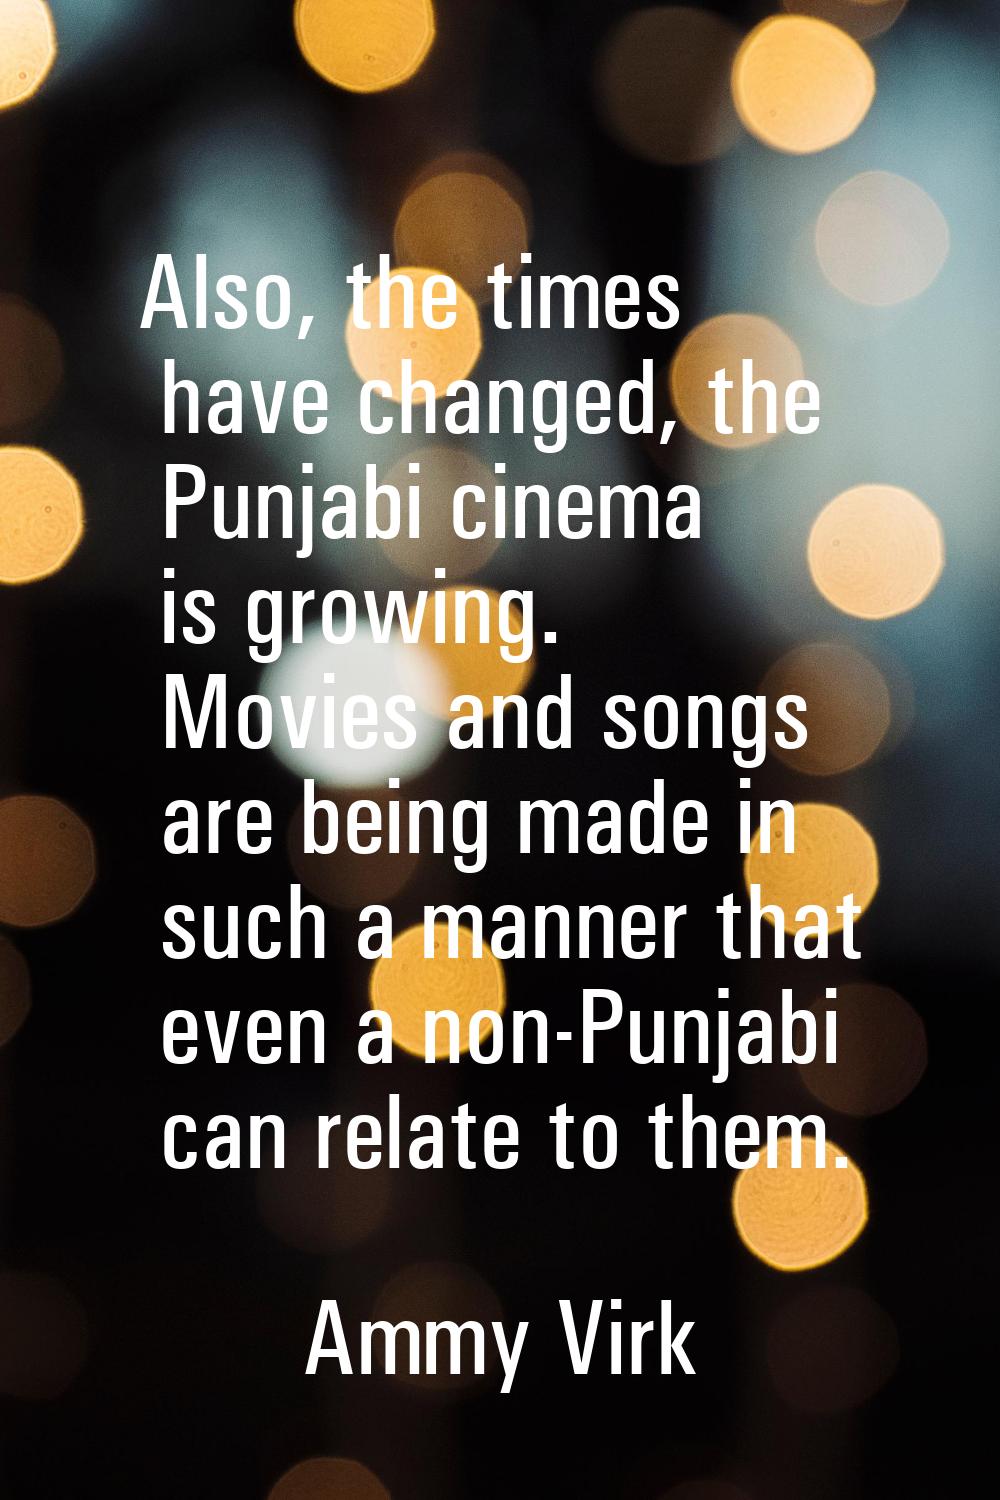 Also, the times have changed, the Punjabi cinema is growing. Movies and songs are being made in suc